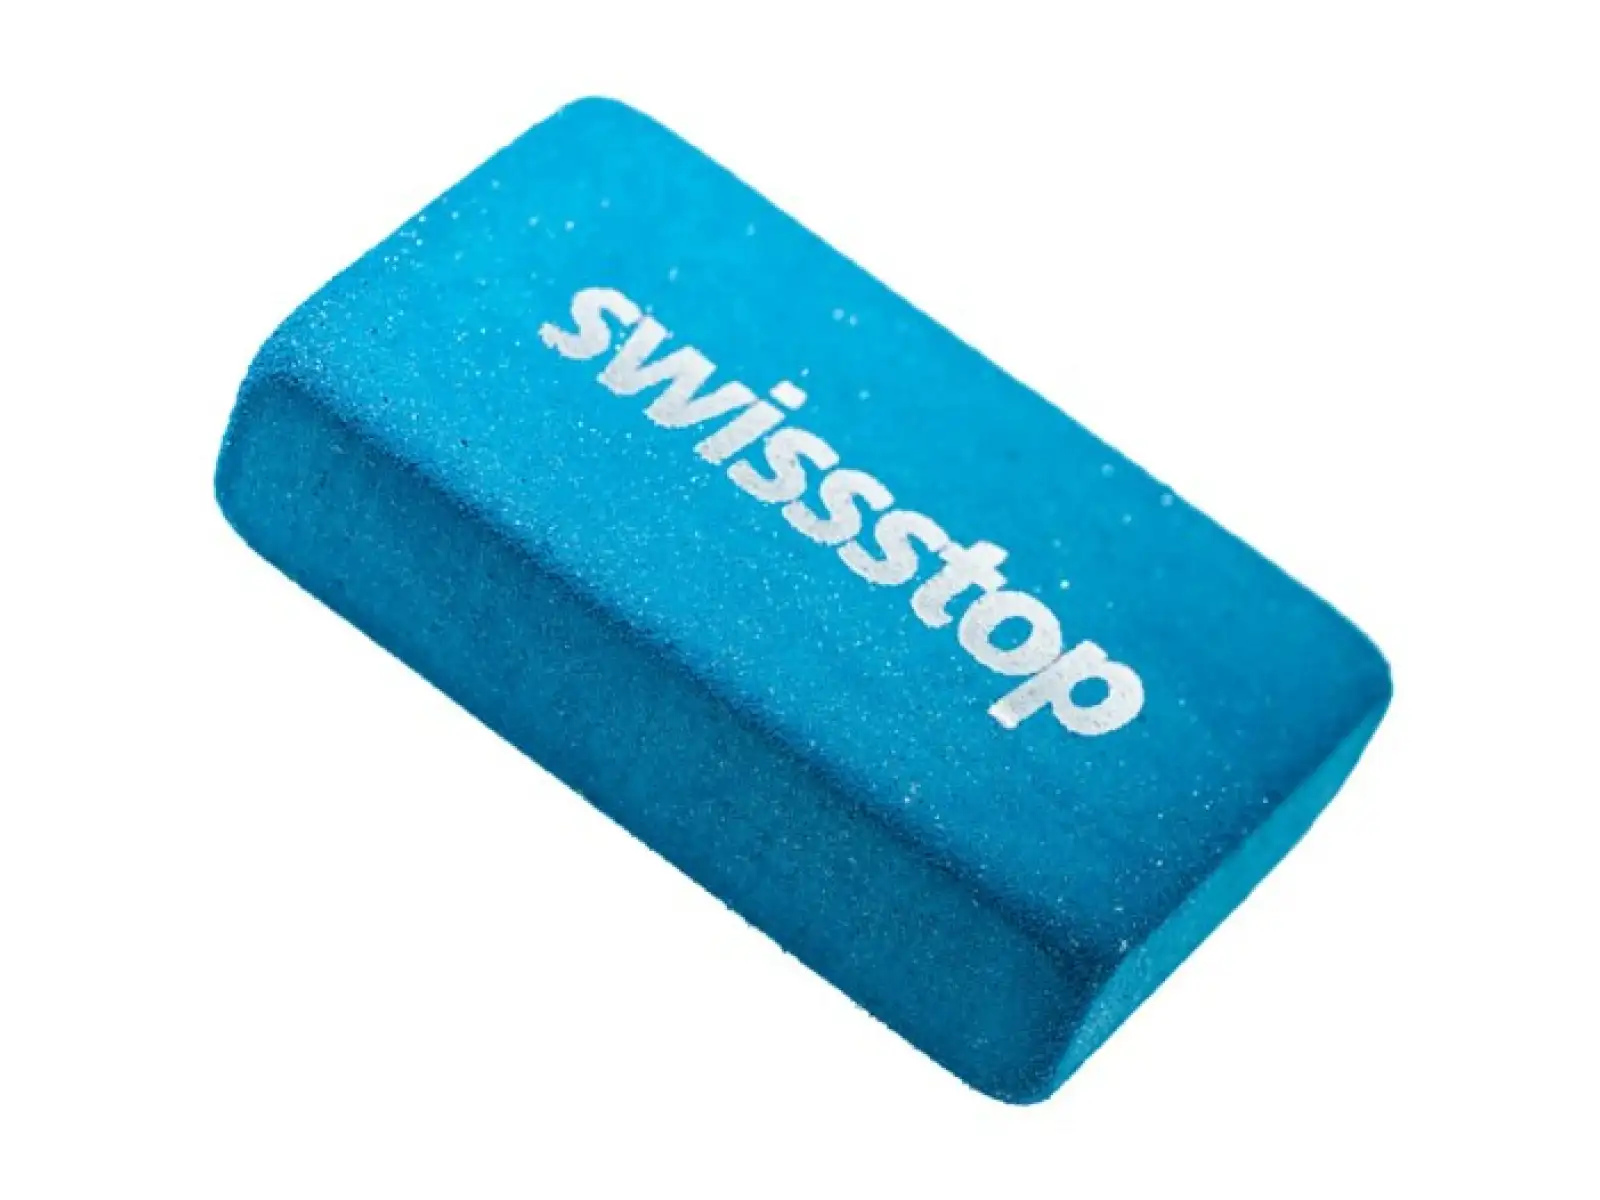 SwissStop rim cleaning rubber